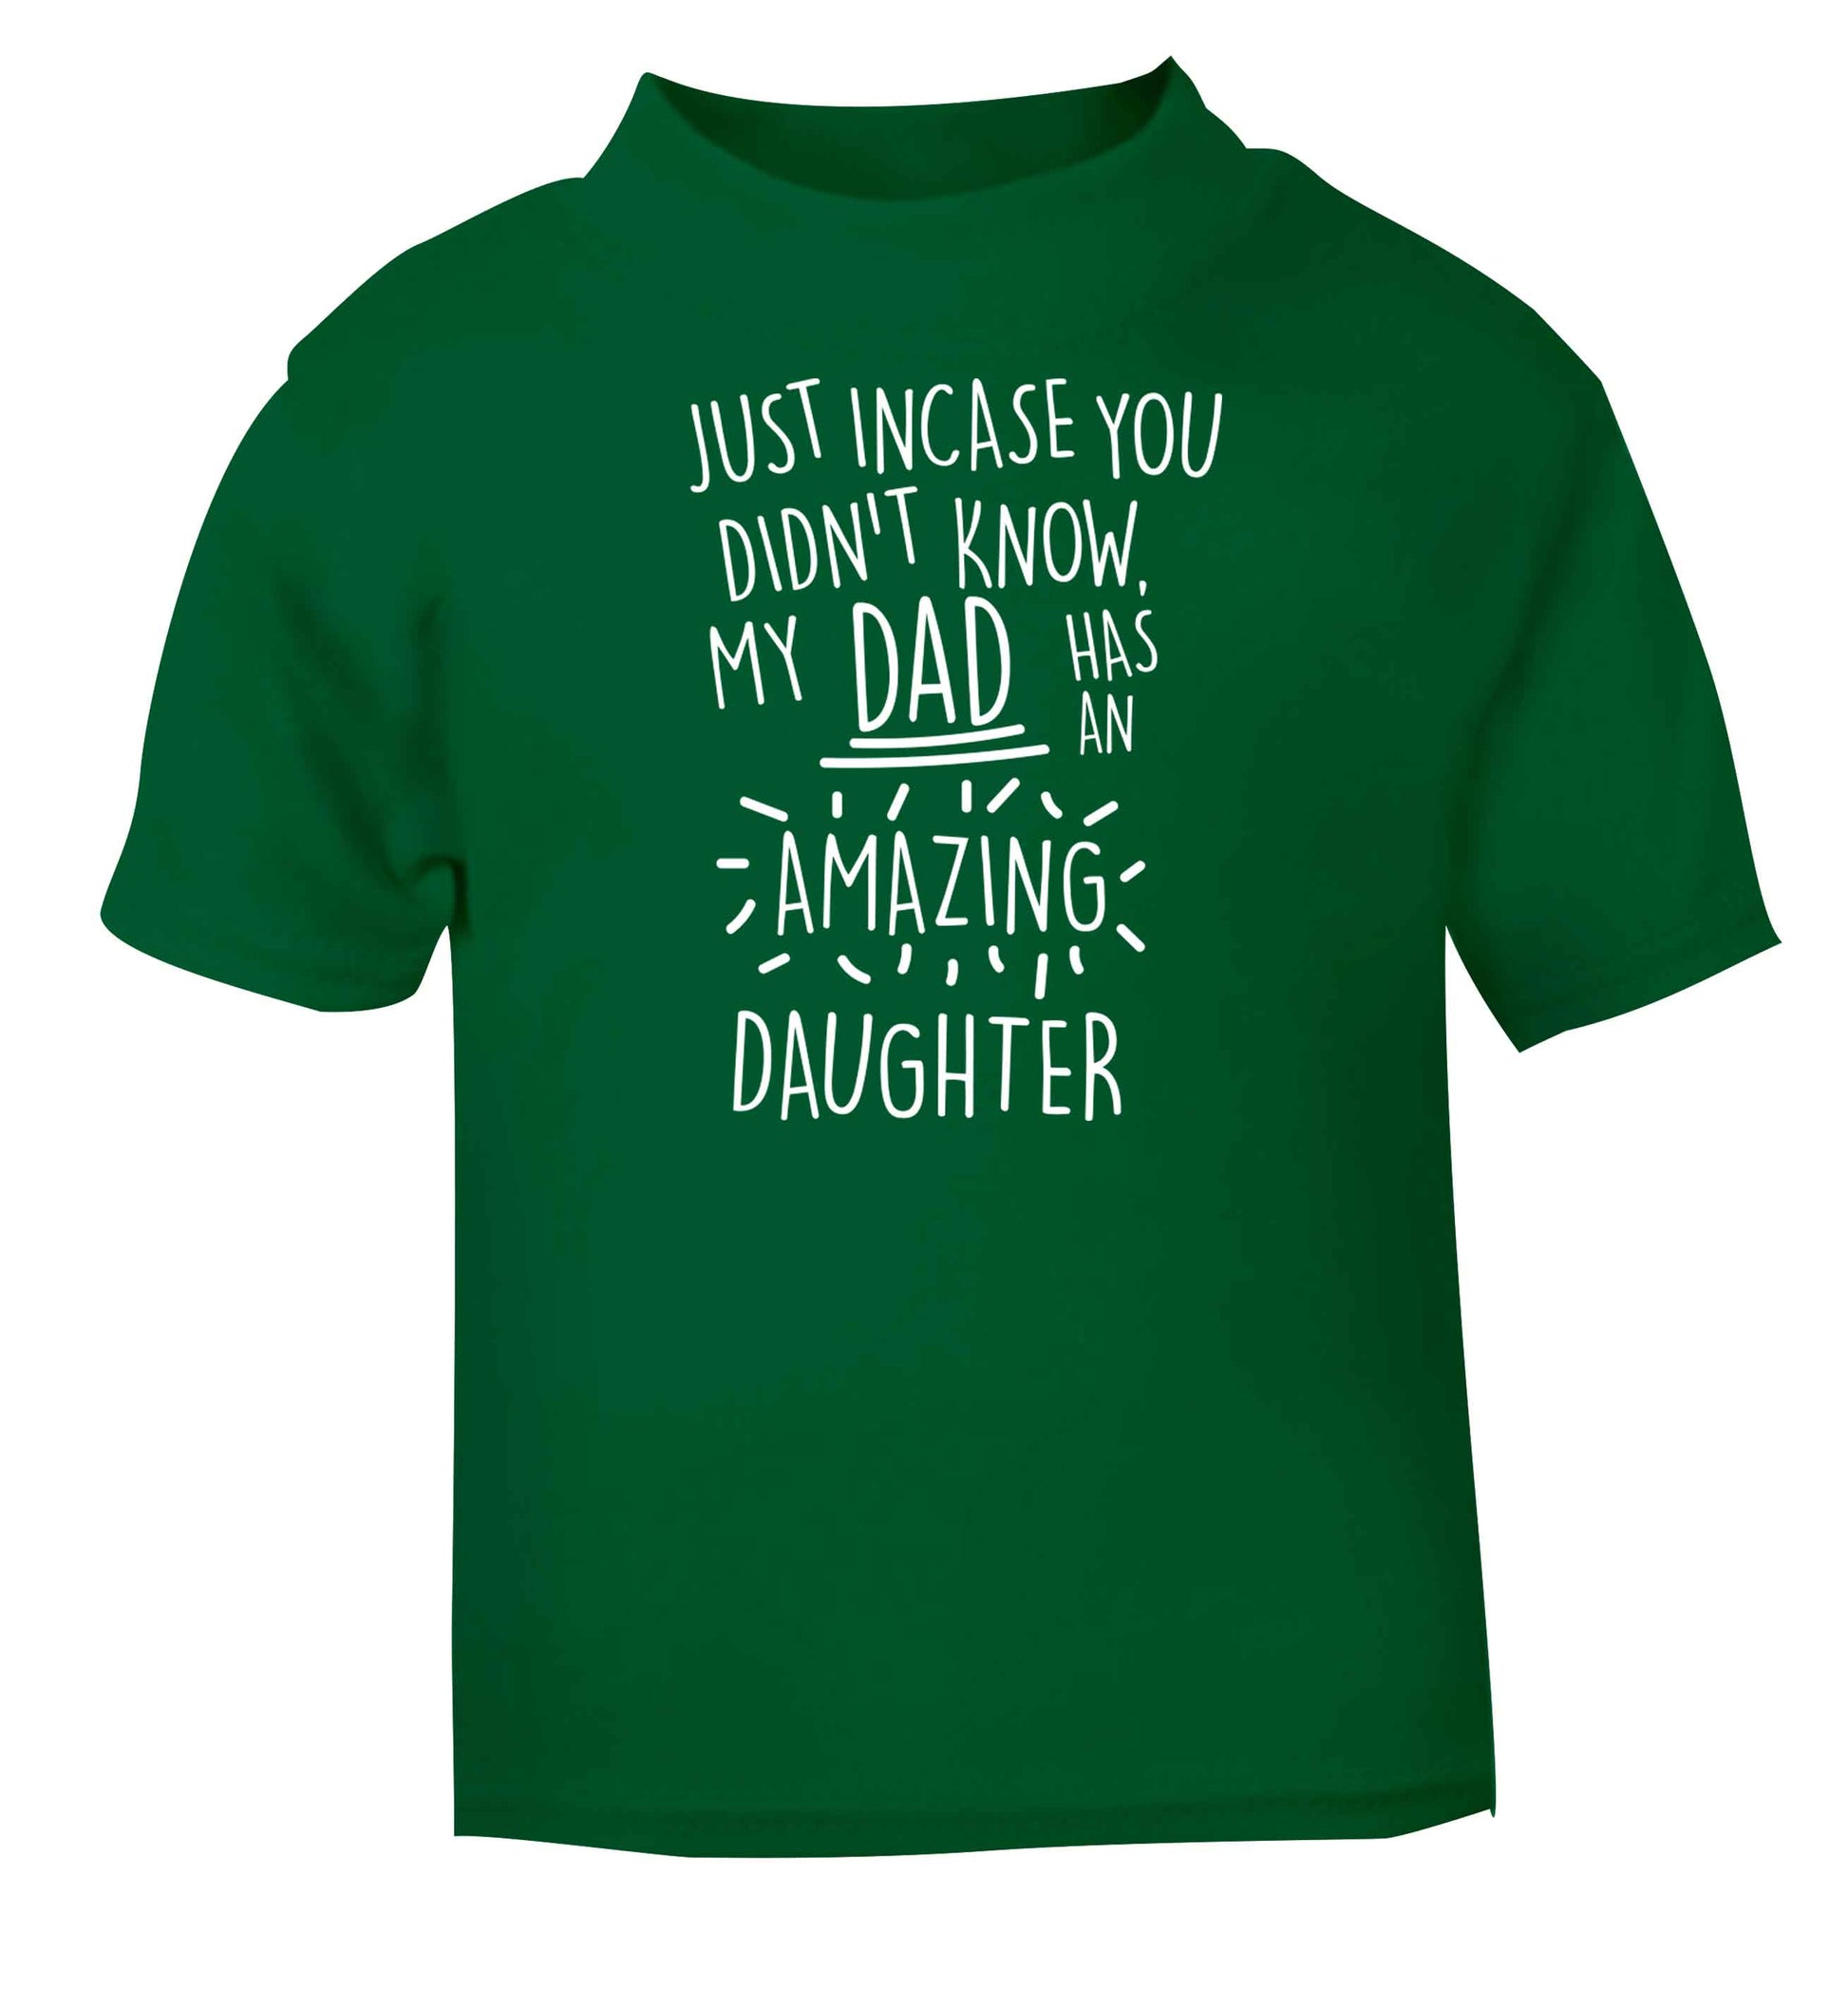 Just incase you didn't know my dad has an amazing daughter green baby toddler Tshirt 2 Years